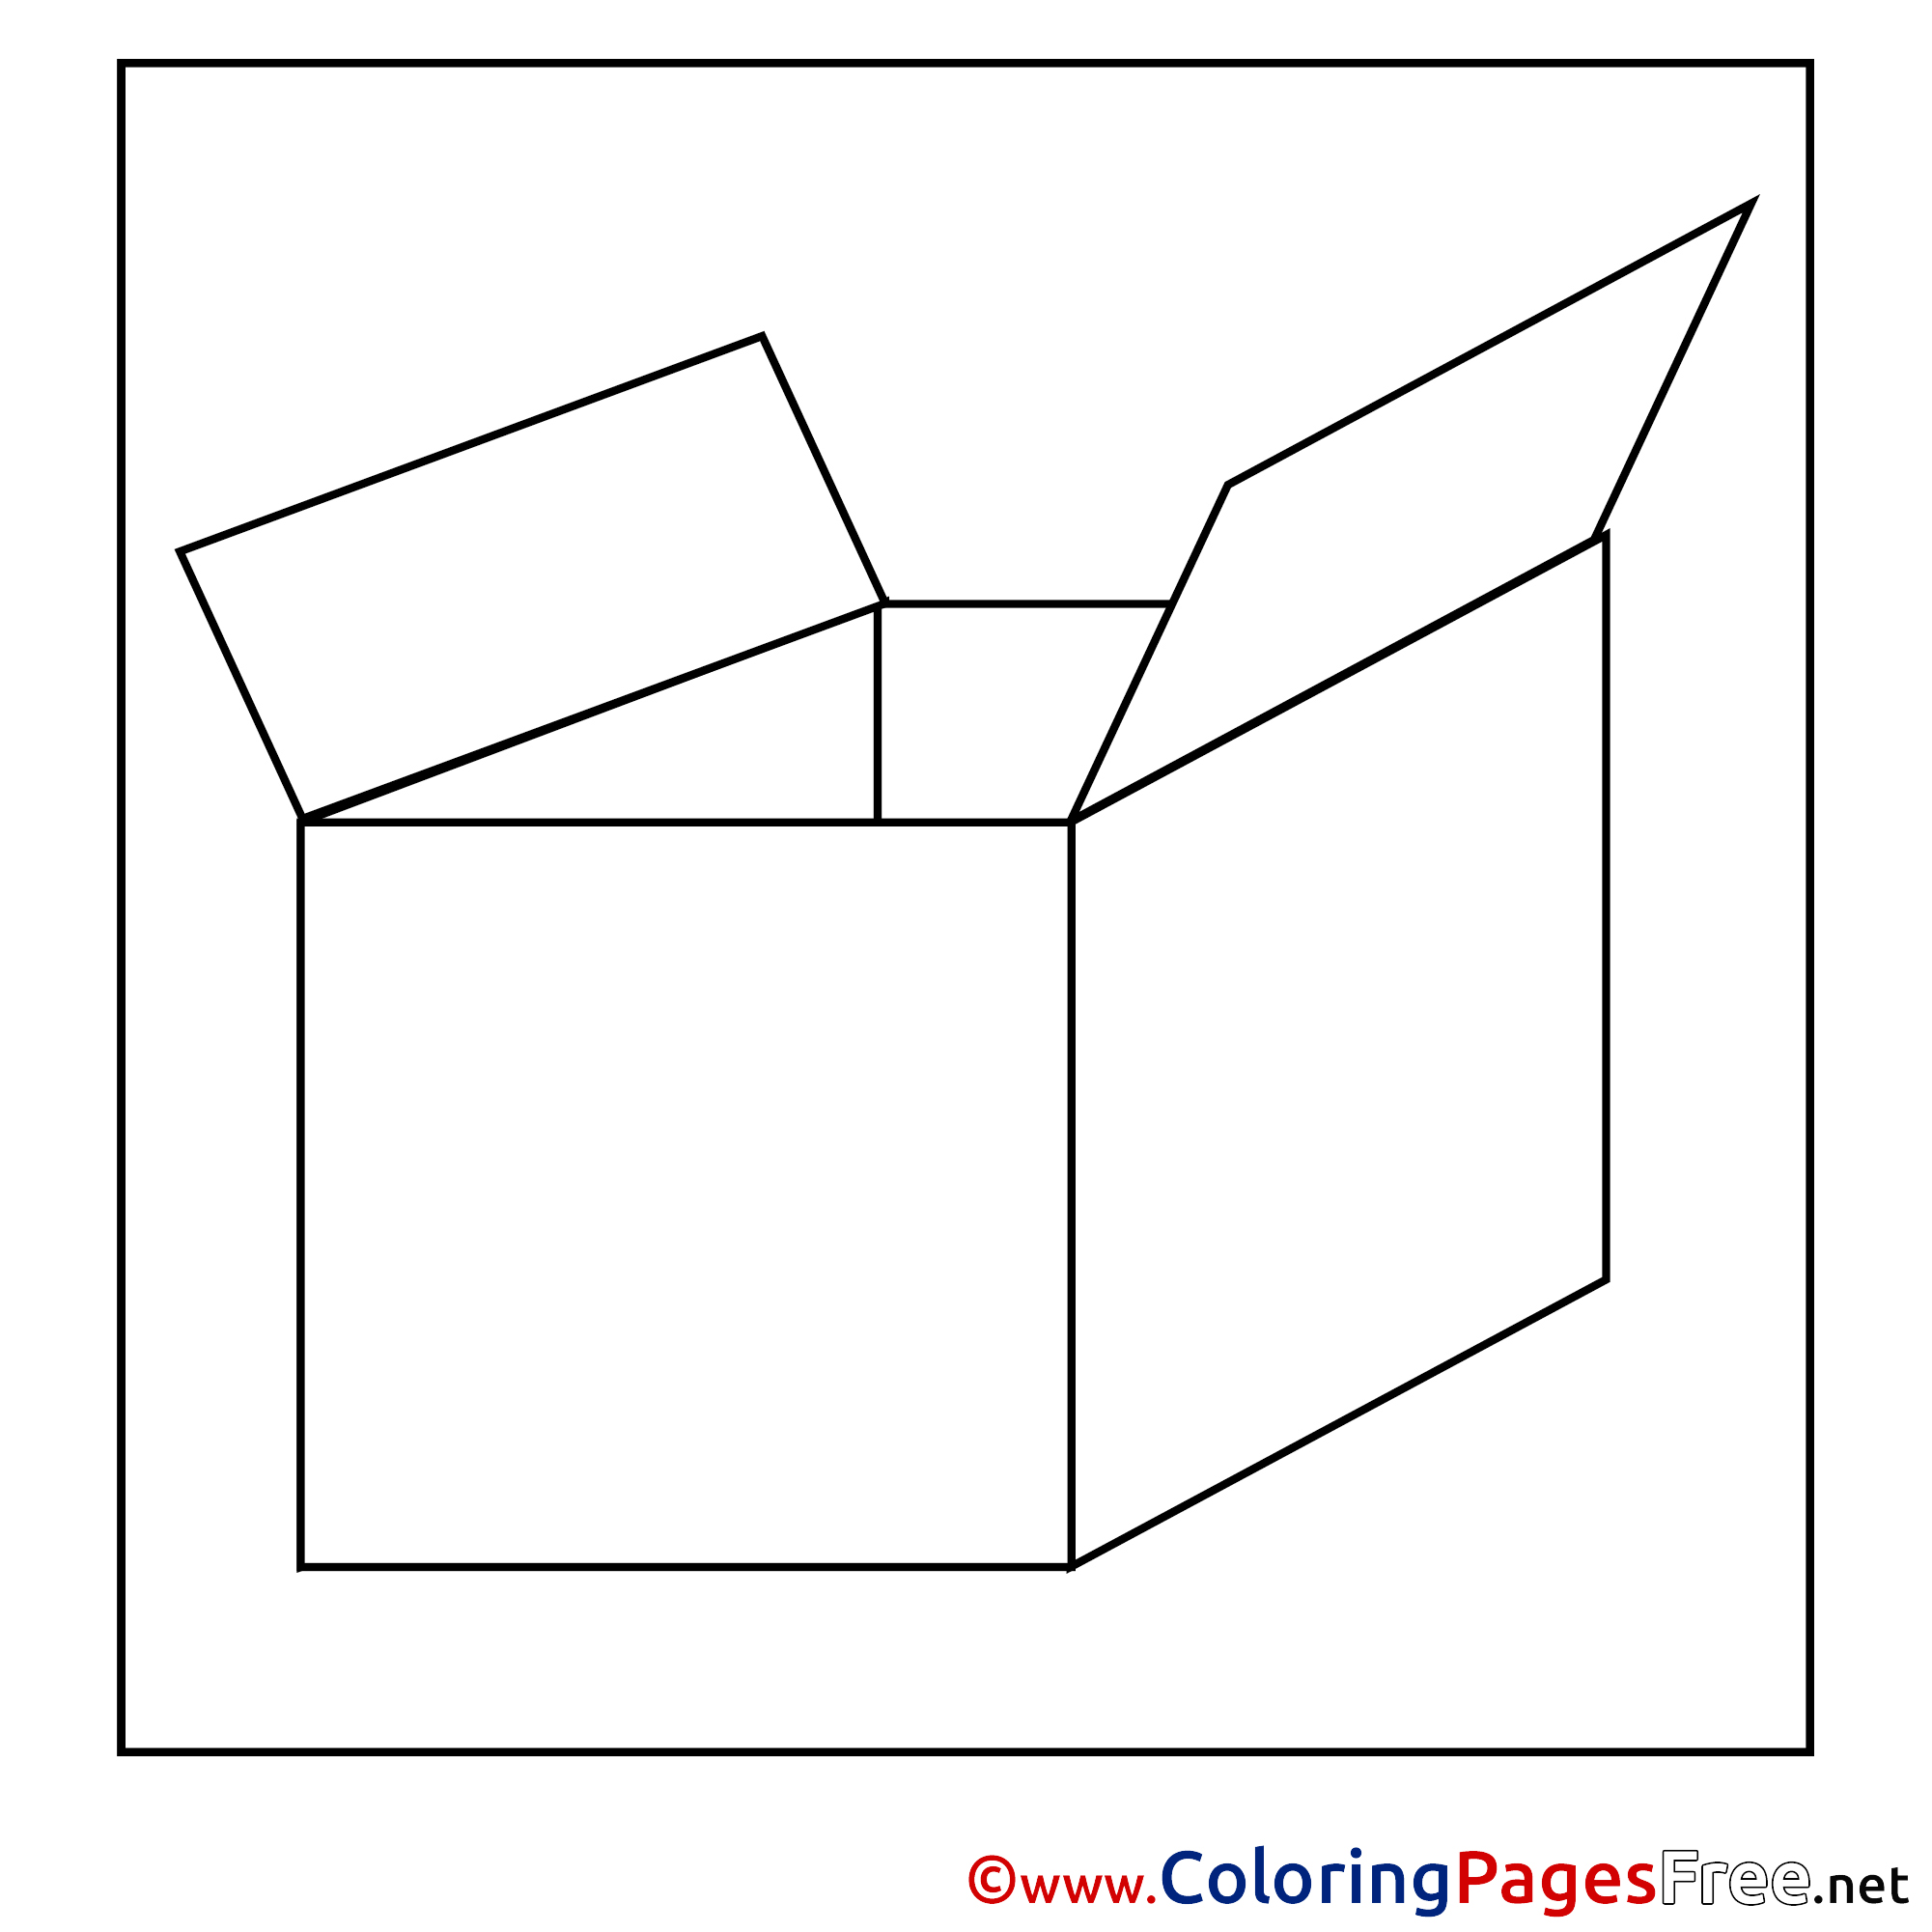 https://www.coloringpagesfree.net/images/joomgallery/originals/economics_coloring_pages_55/box_free_colouring_page_download_20161019_2086030298.jpg